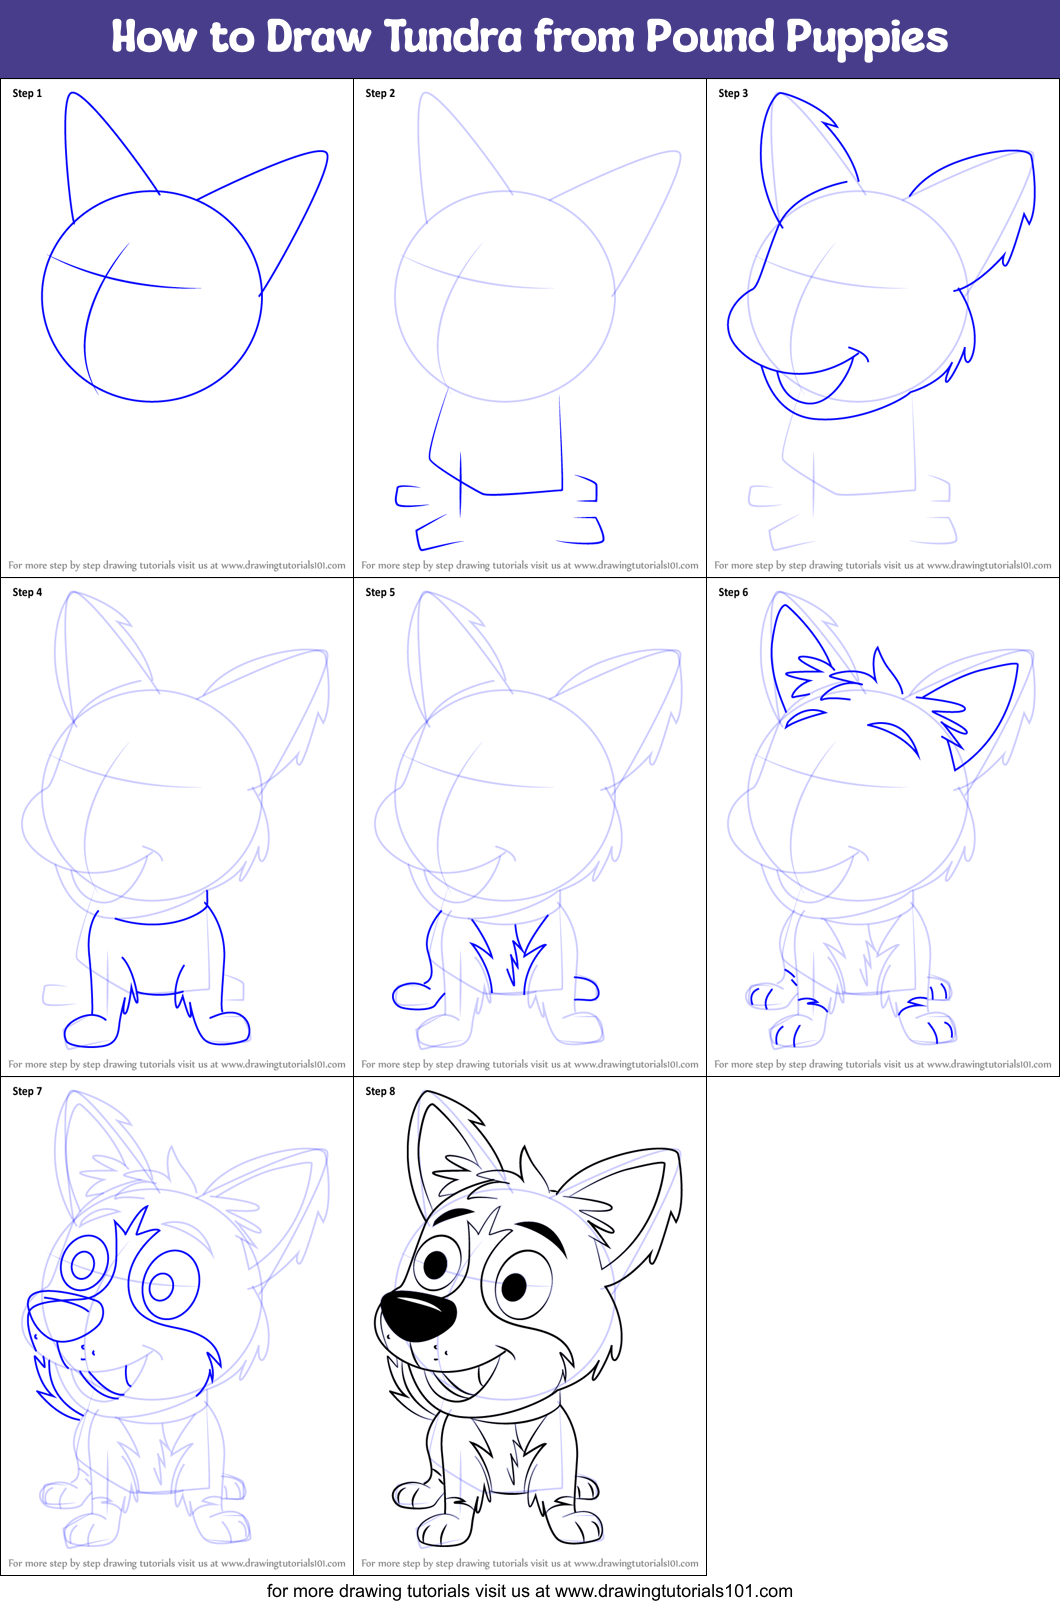 How to Draw Tundra from Pound Puppies printable step by step drawing sheet  : 